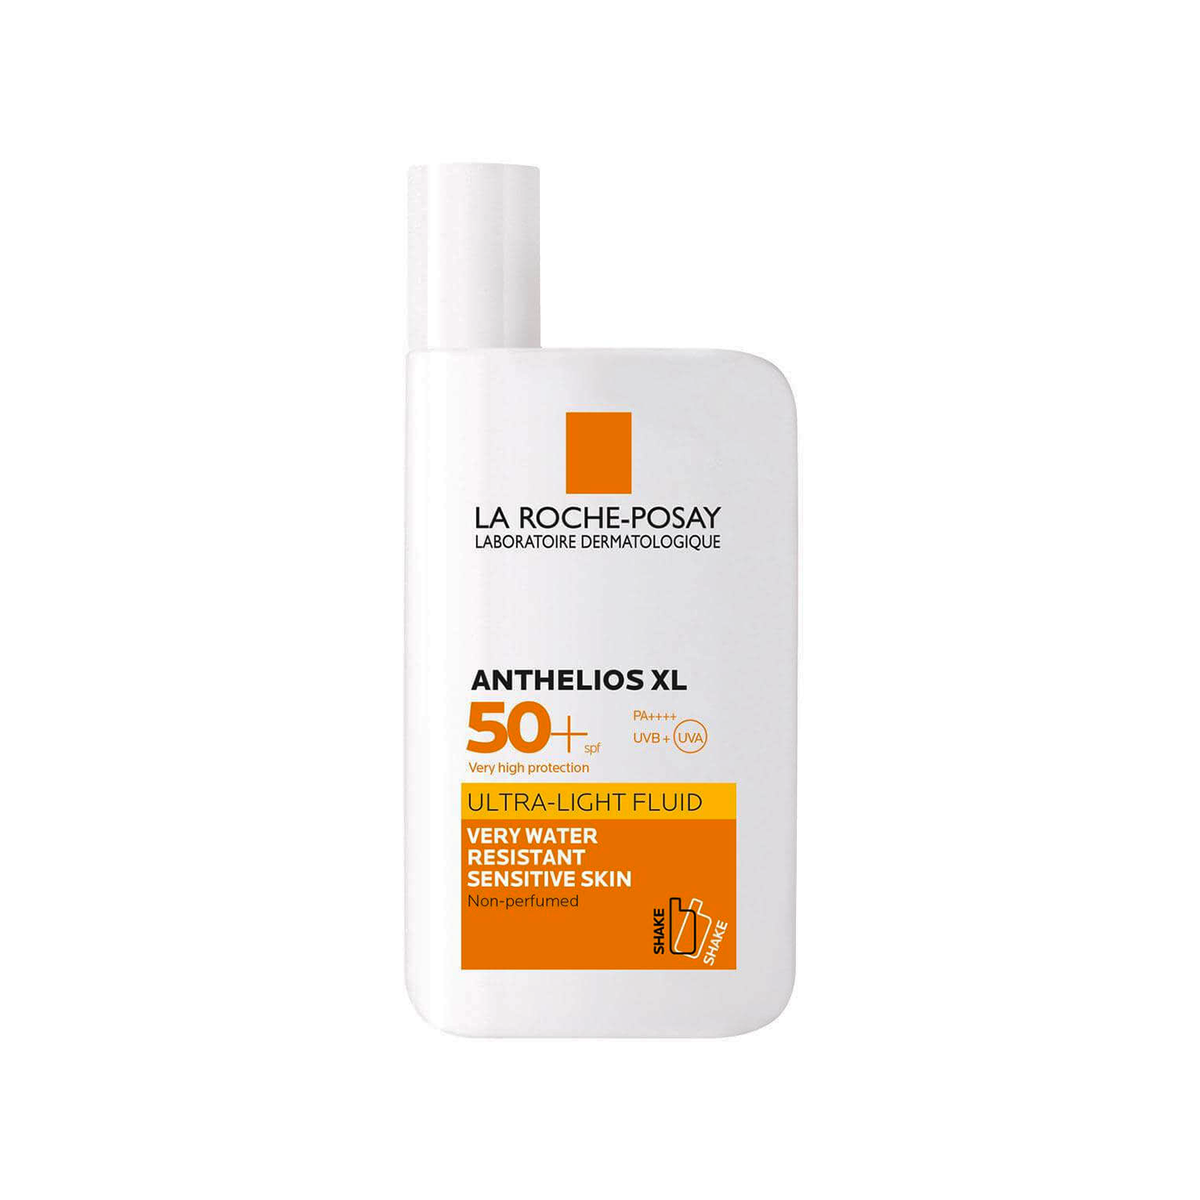 la-roche-posay-anthelios-xl-tinted-ultra-light-fluid-spf50